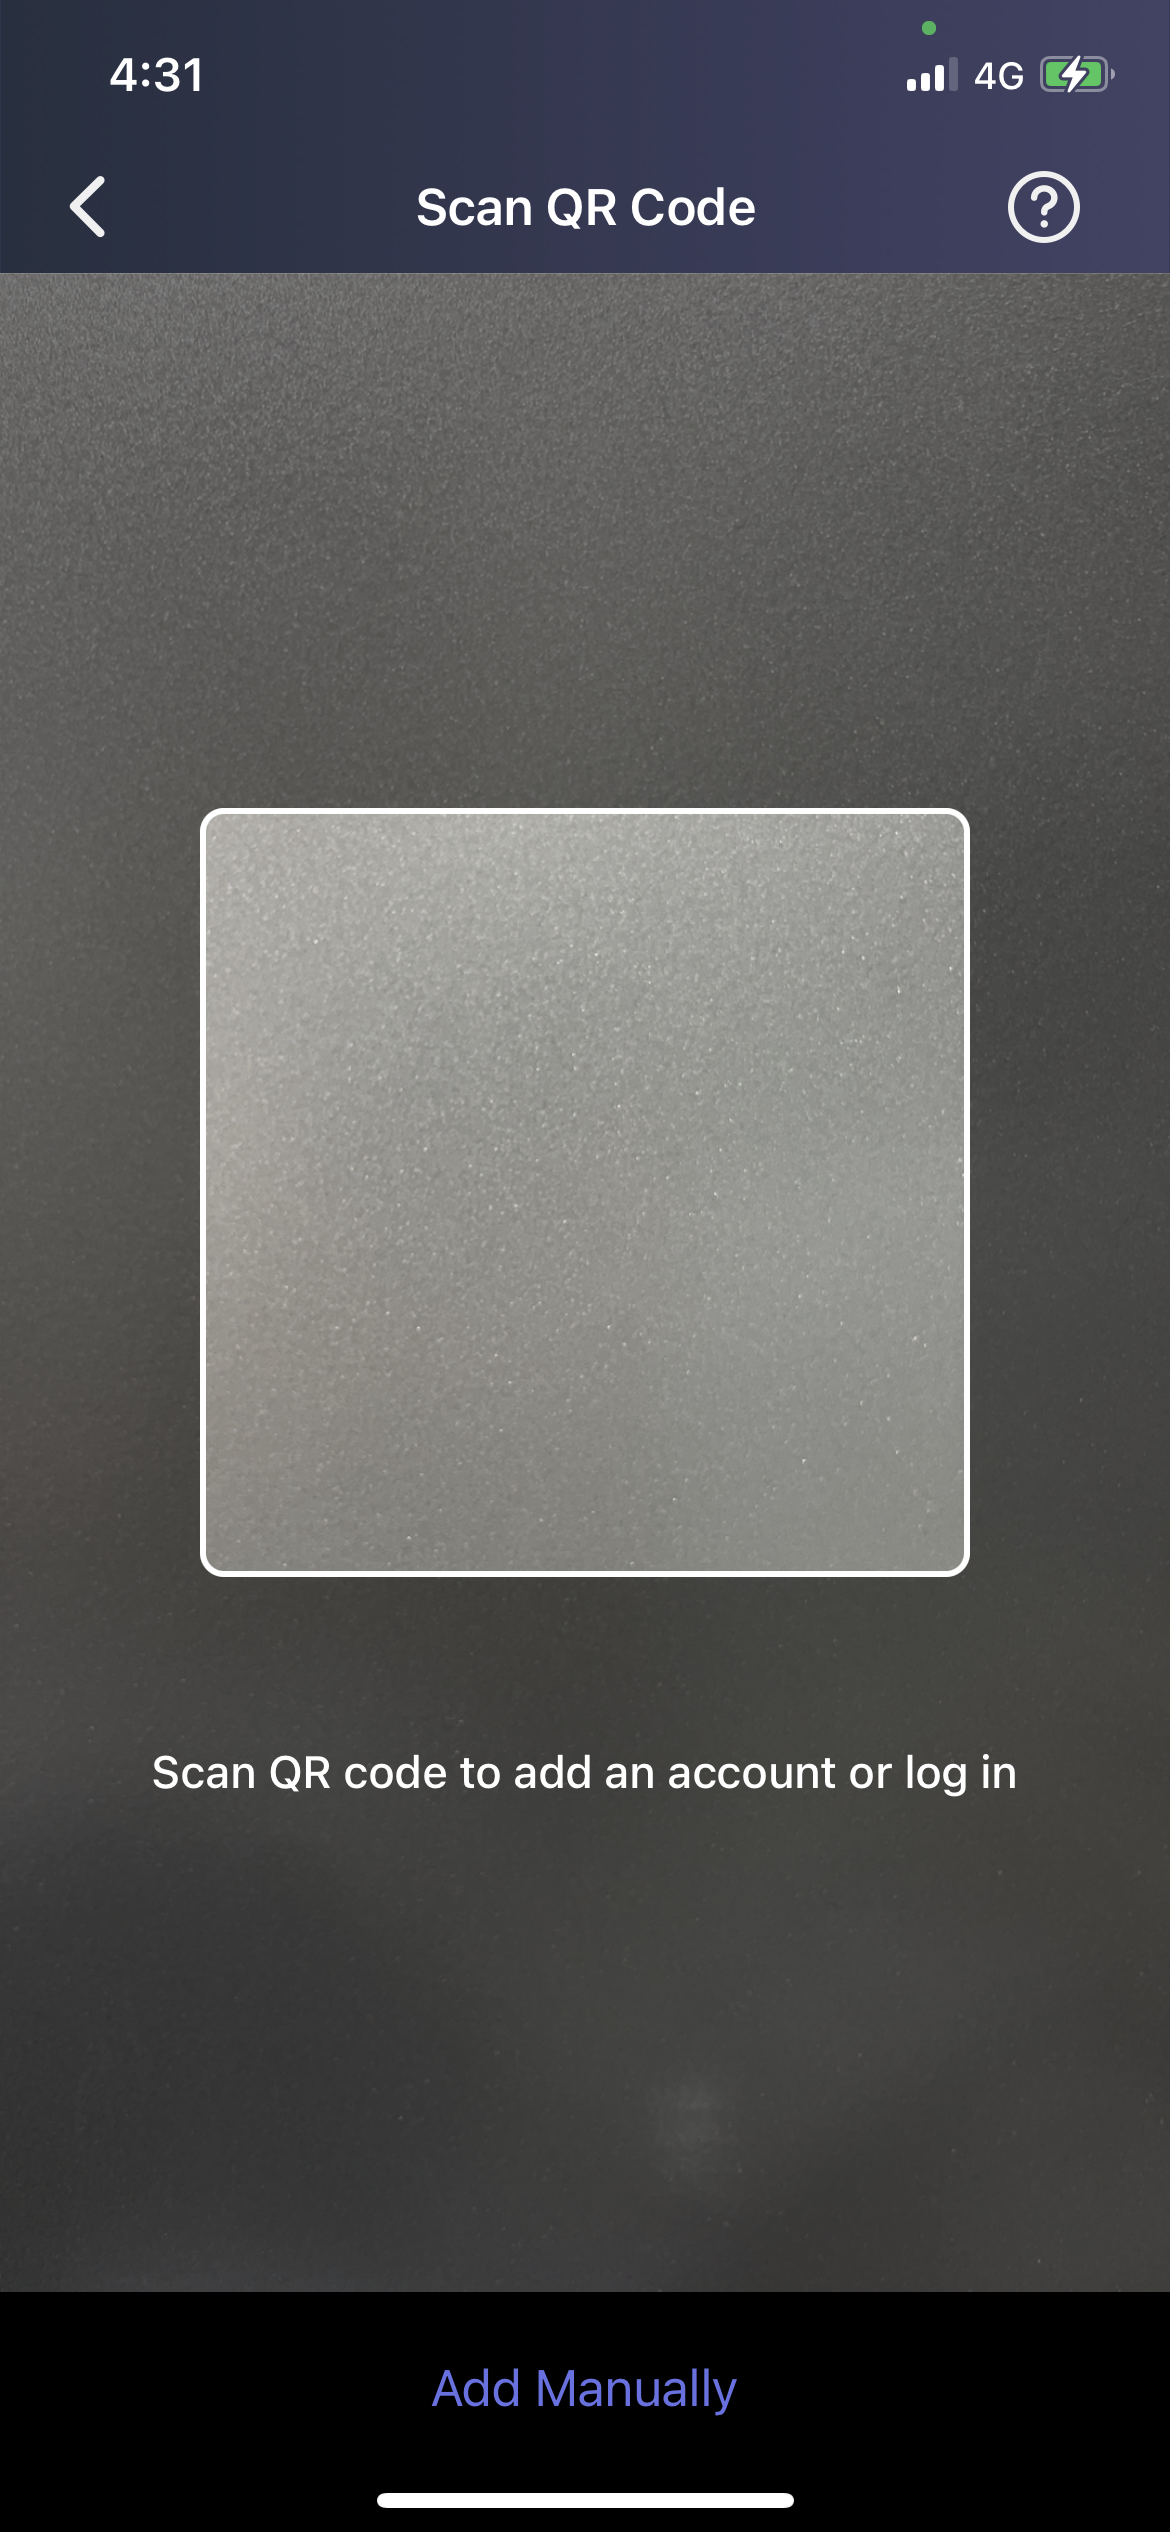 Log In with a QR code